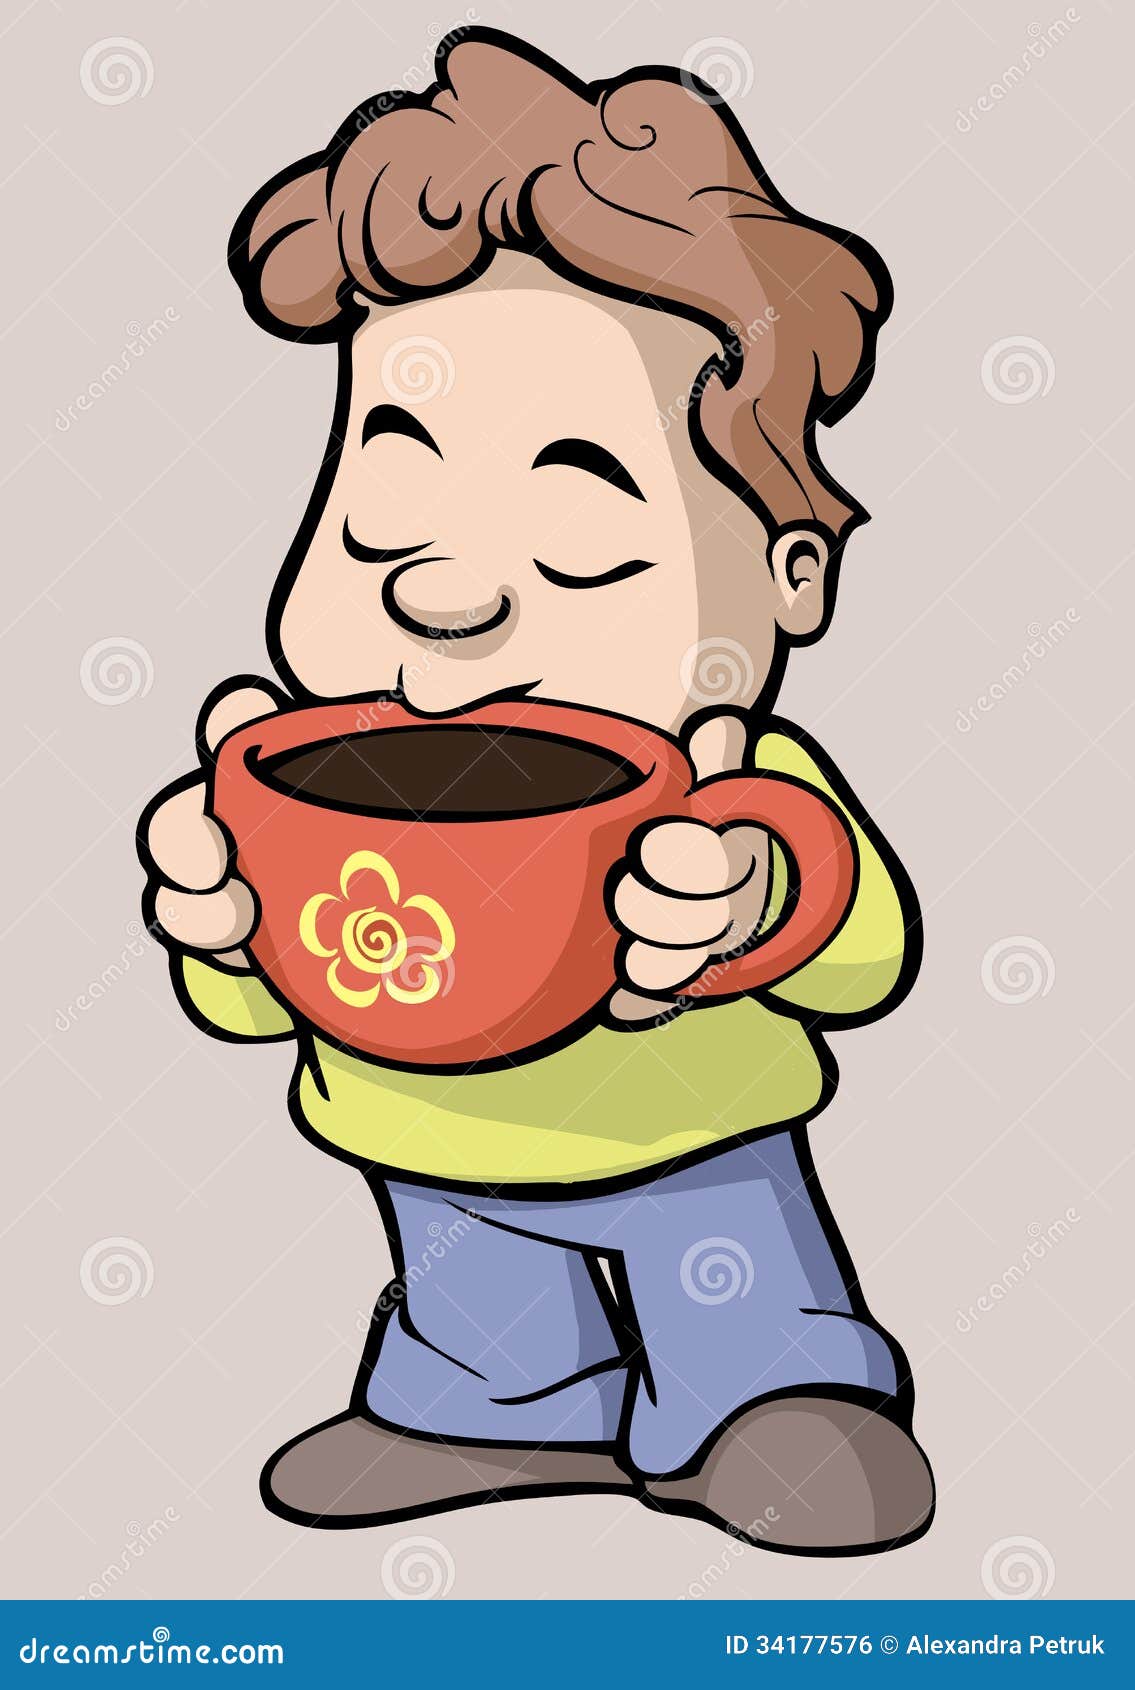 clipart drinking coffee - photo #3